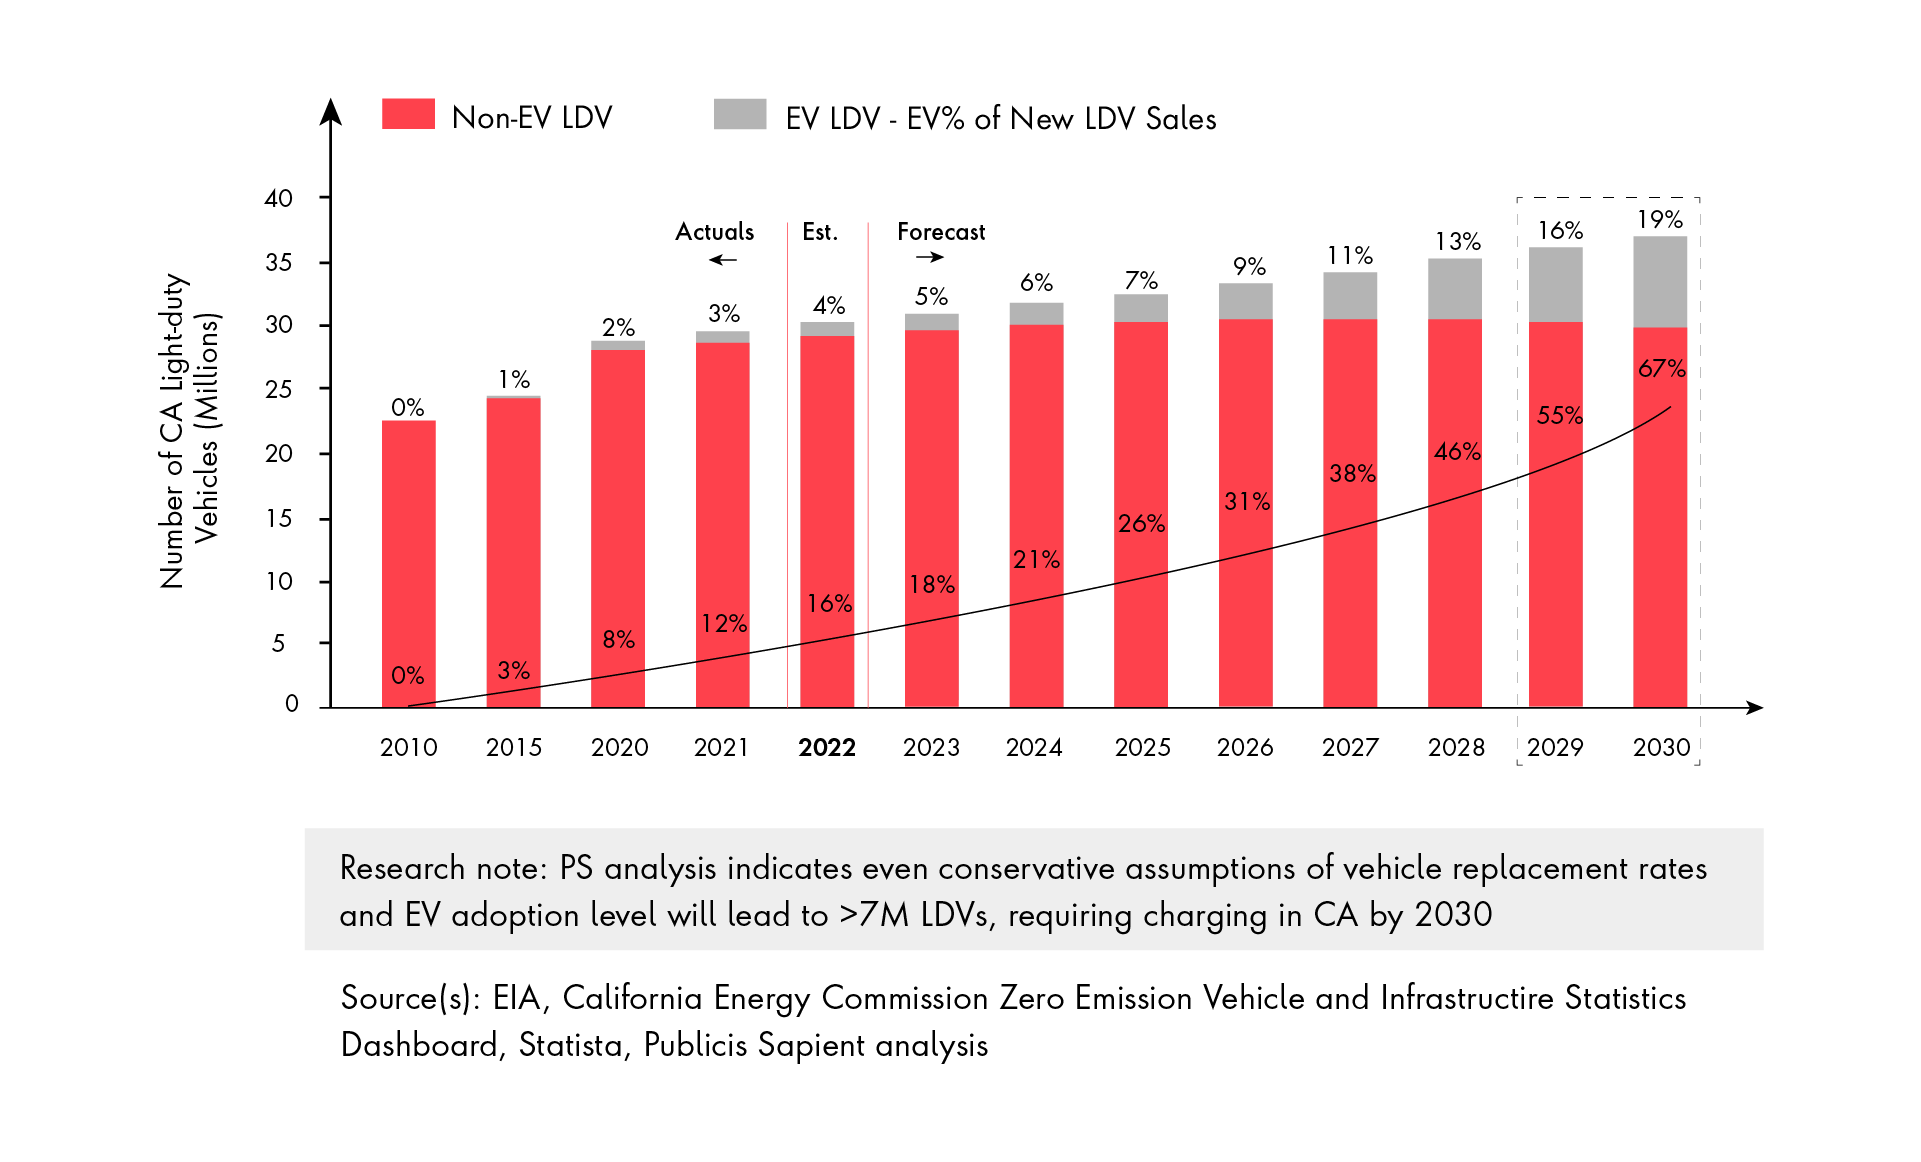 Bar graph shows a steady increase in the number of non-EV LDVs and EV LDVs in California from 2010 to 2030.